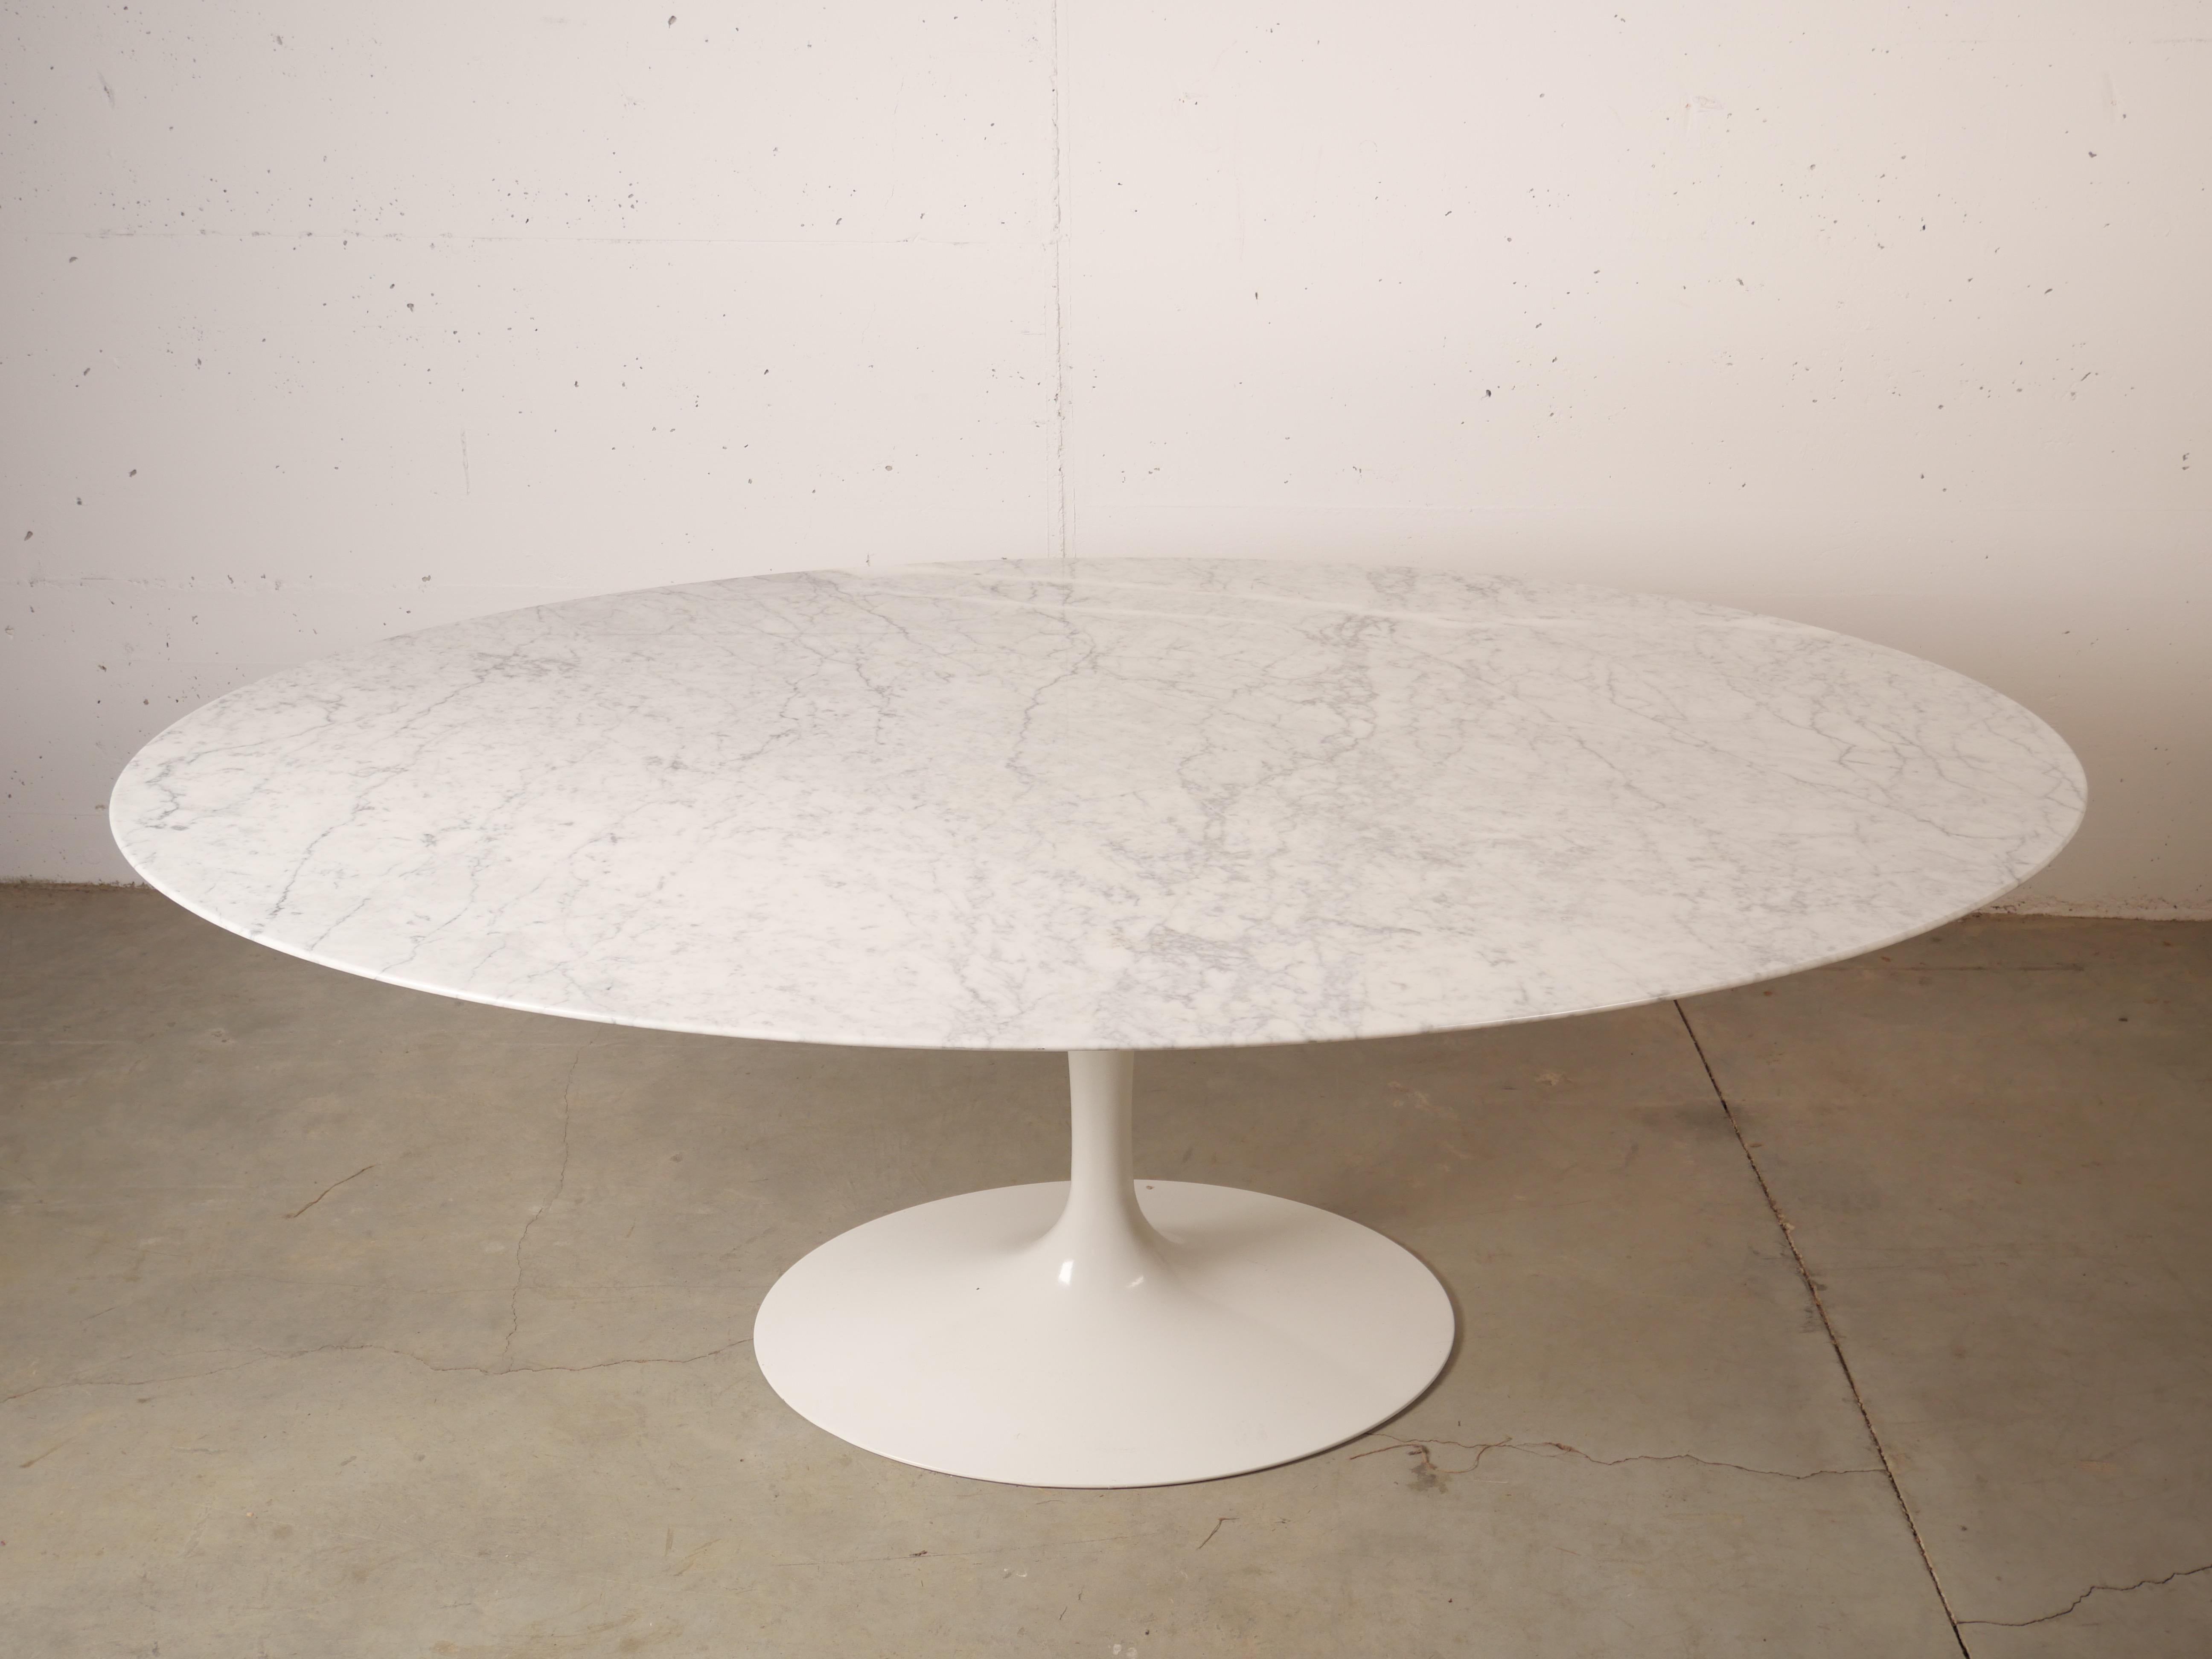 Stunning oval marble-top pedestal dining table designed by Eero Saarinen for Knoll features a broad 78